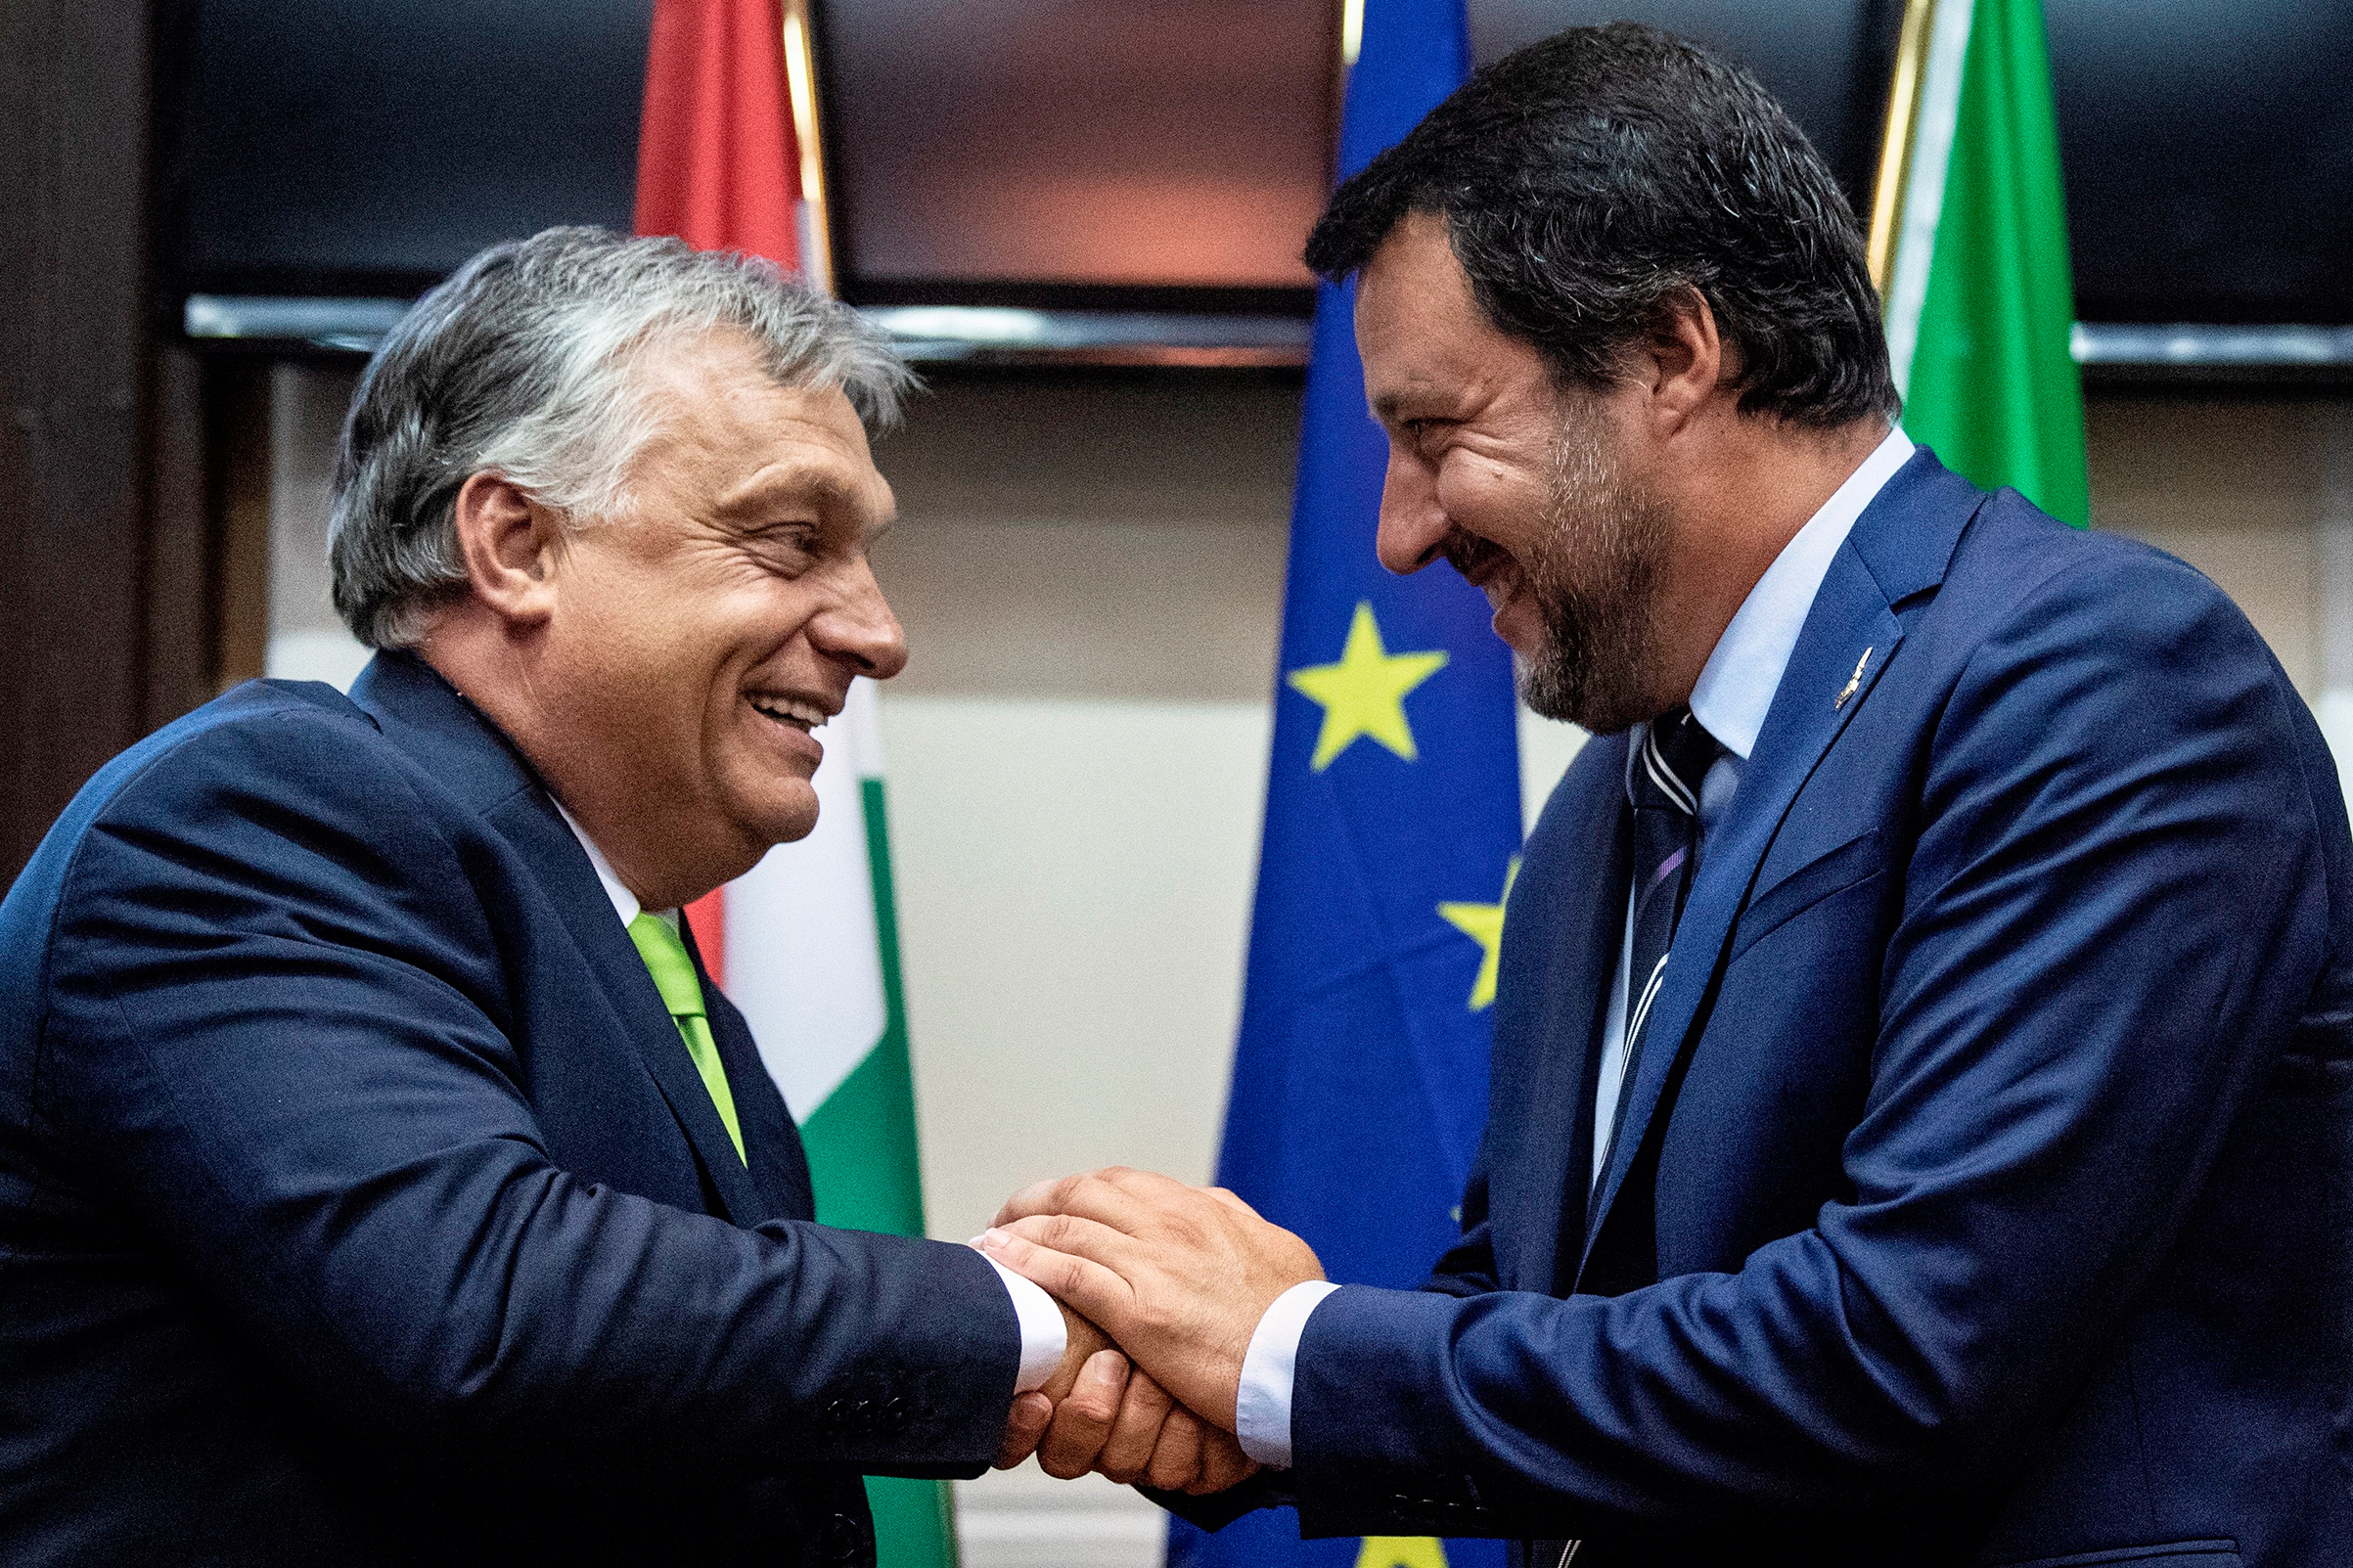 Italy’s Salvini, right, greets Hungary’s Orban in Milan (Marco Bertorello—AFP/Getty Images)